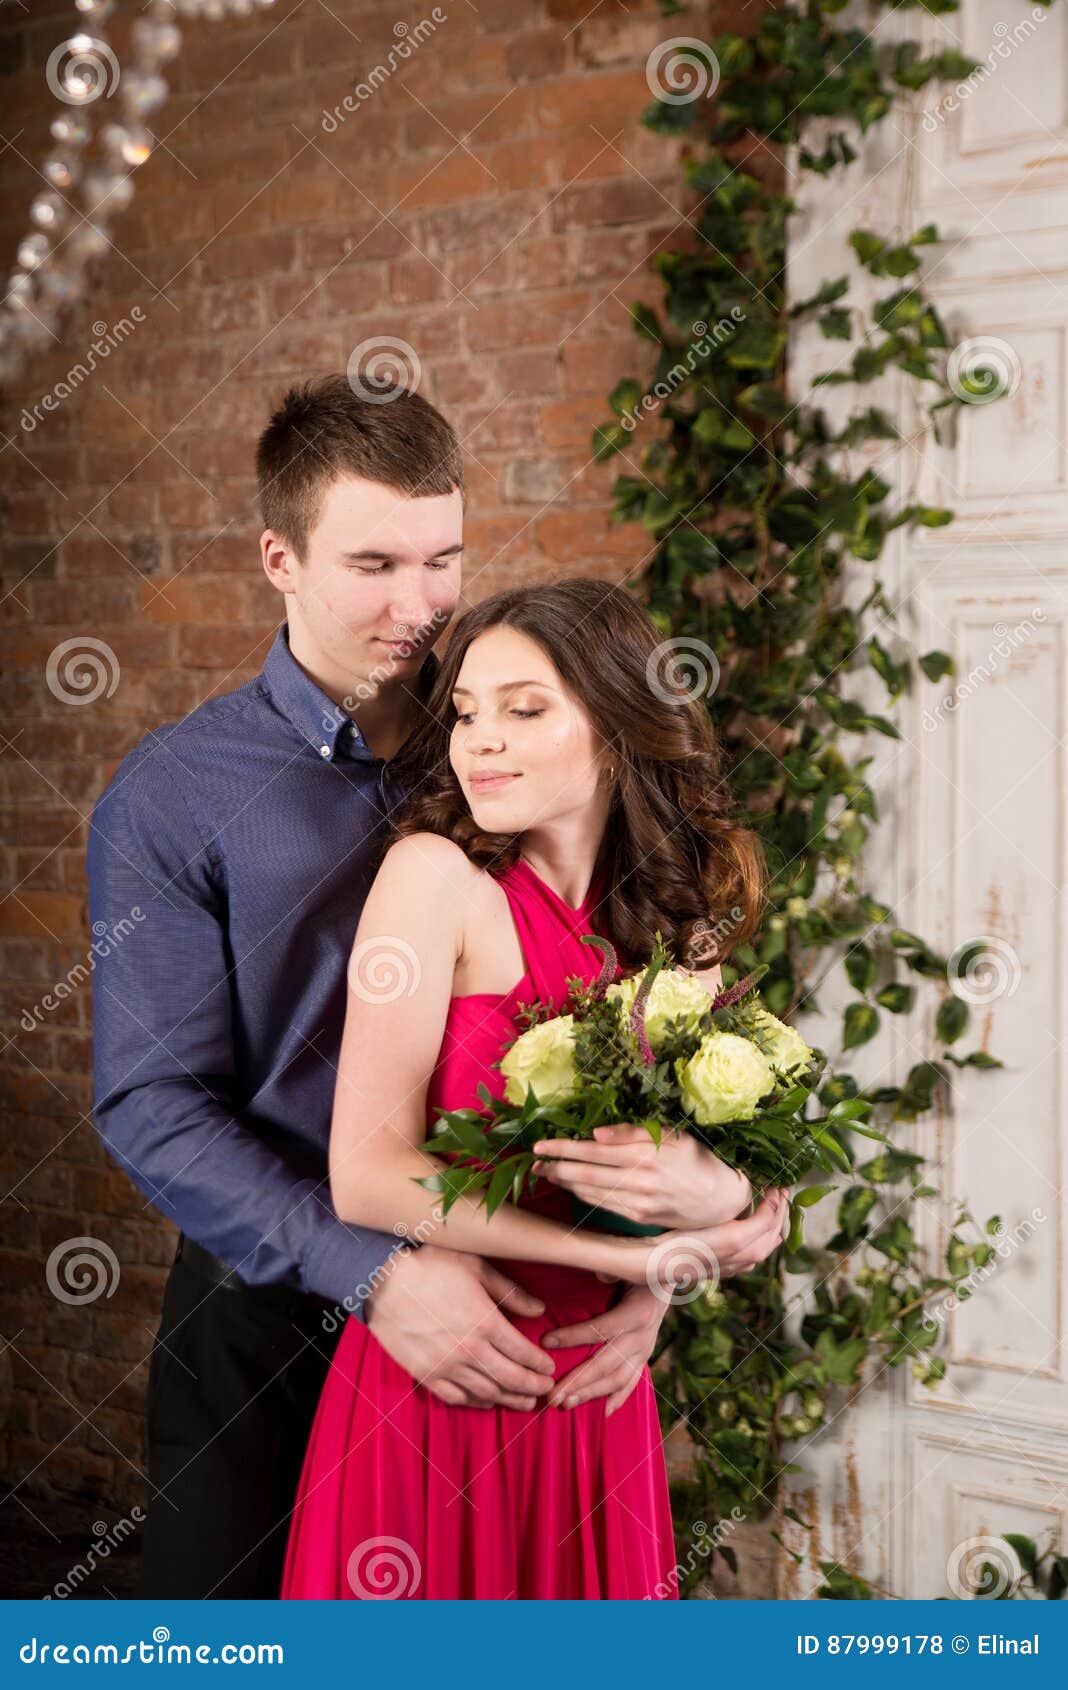 Love Story Romantic Couple with Flowers. Woman in Pink Dress Stock ...